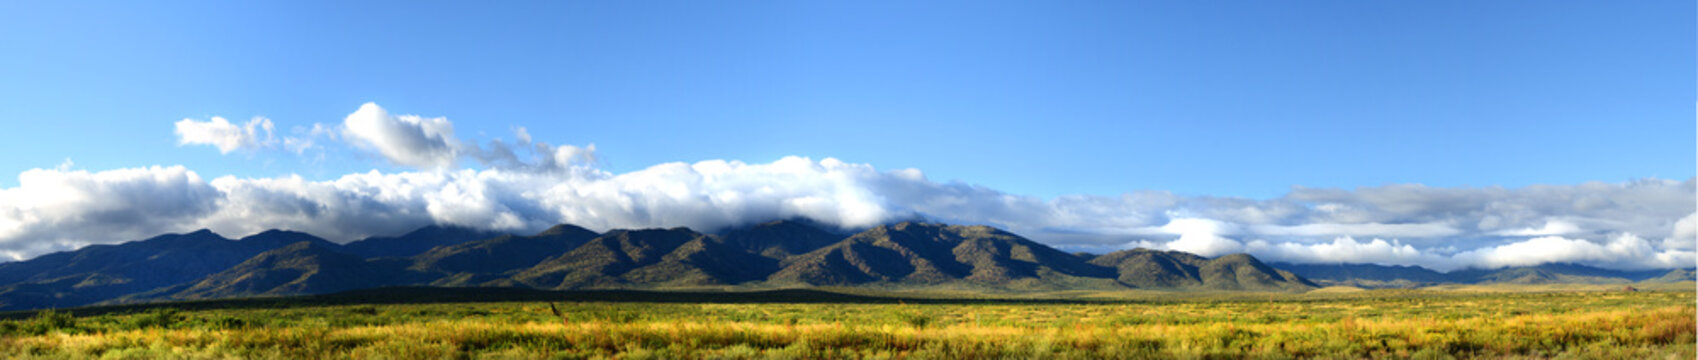 Panoramic view of the mountains of northern New Mexico